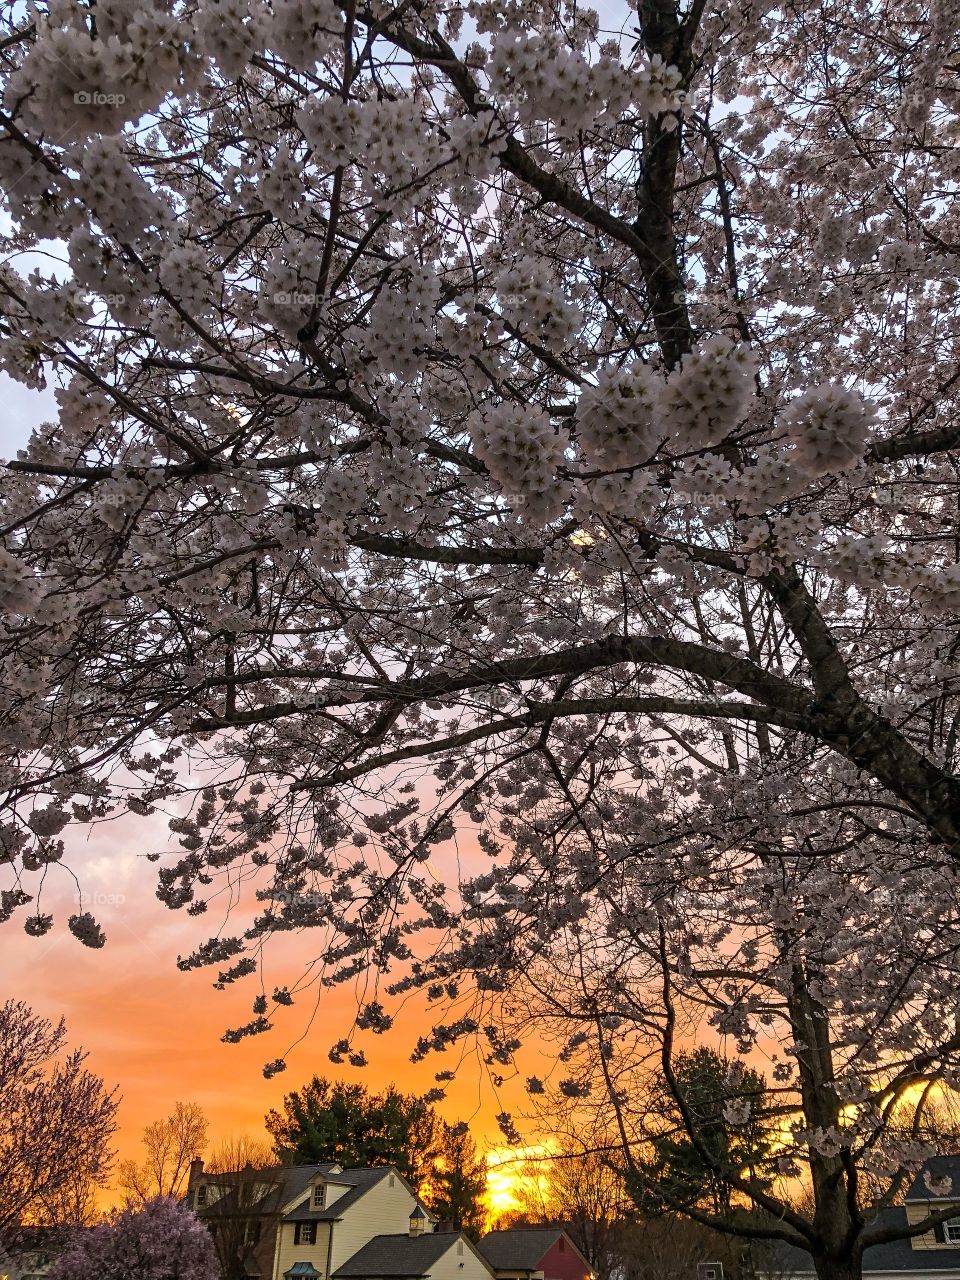 blooming cherry tree at sunset